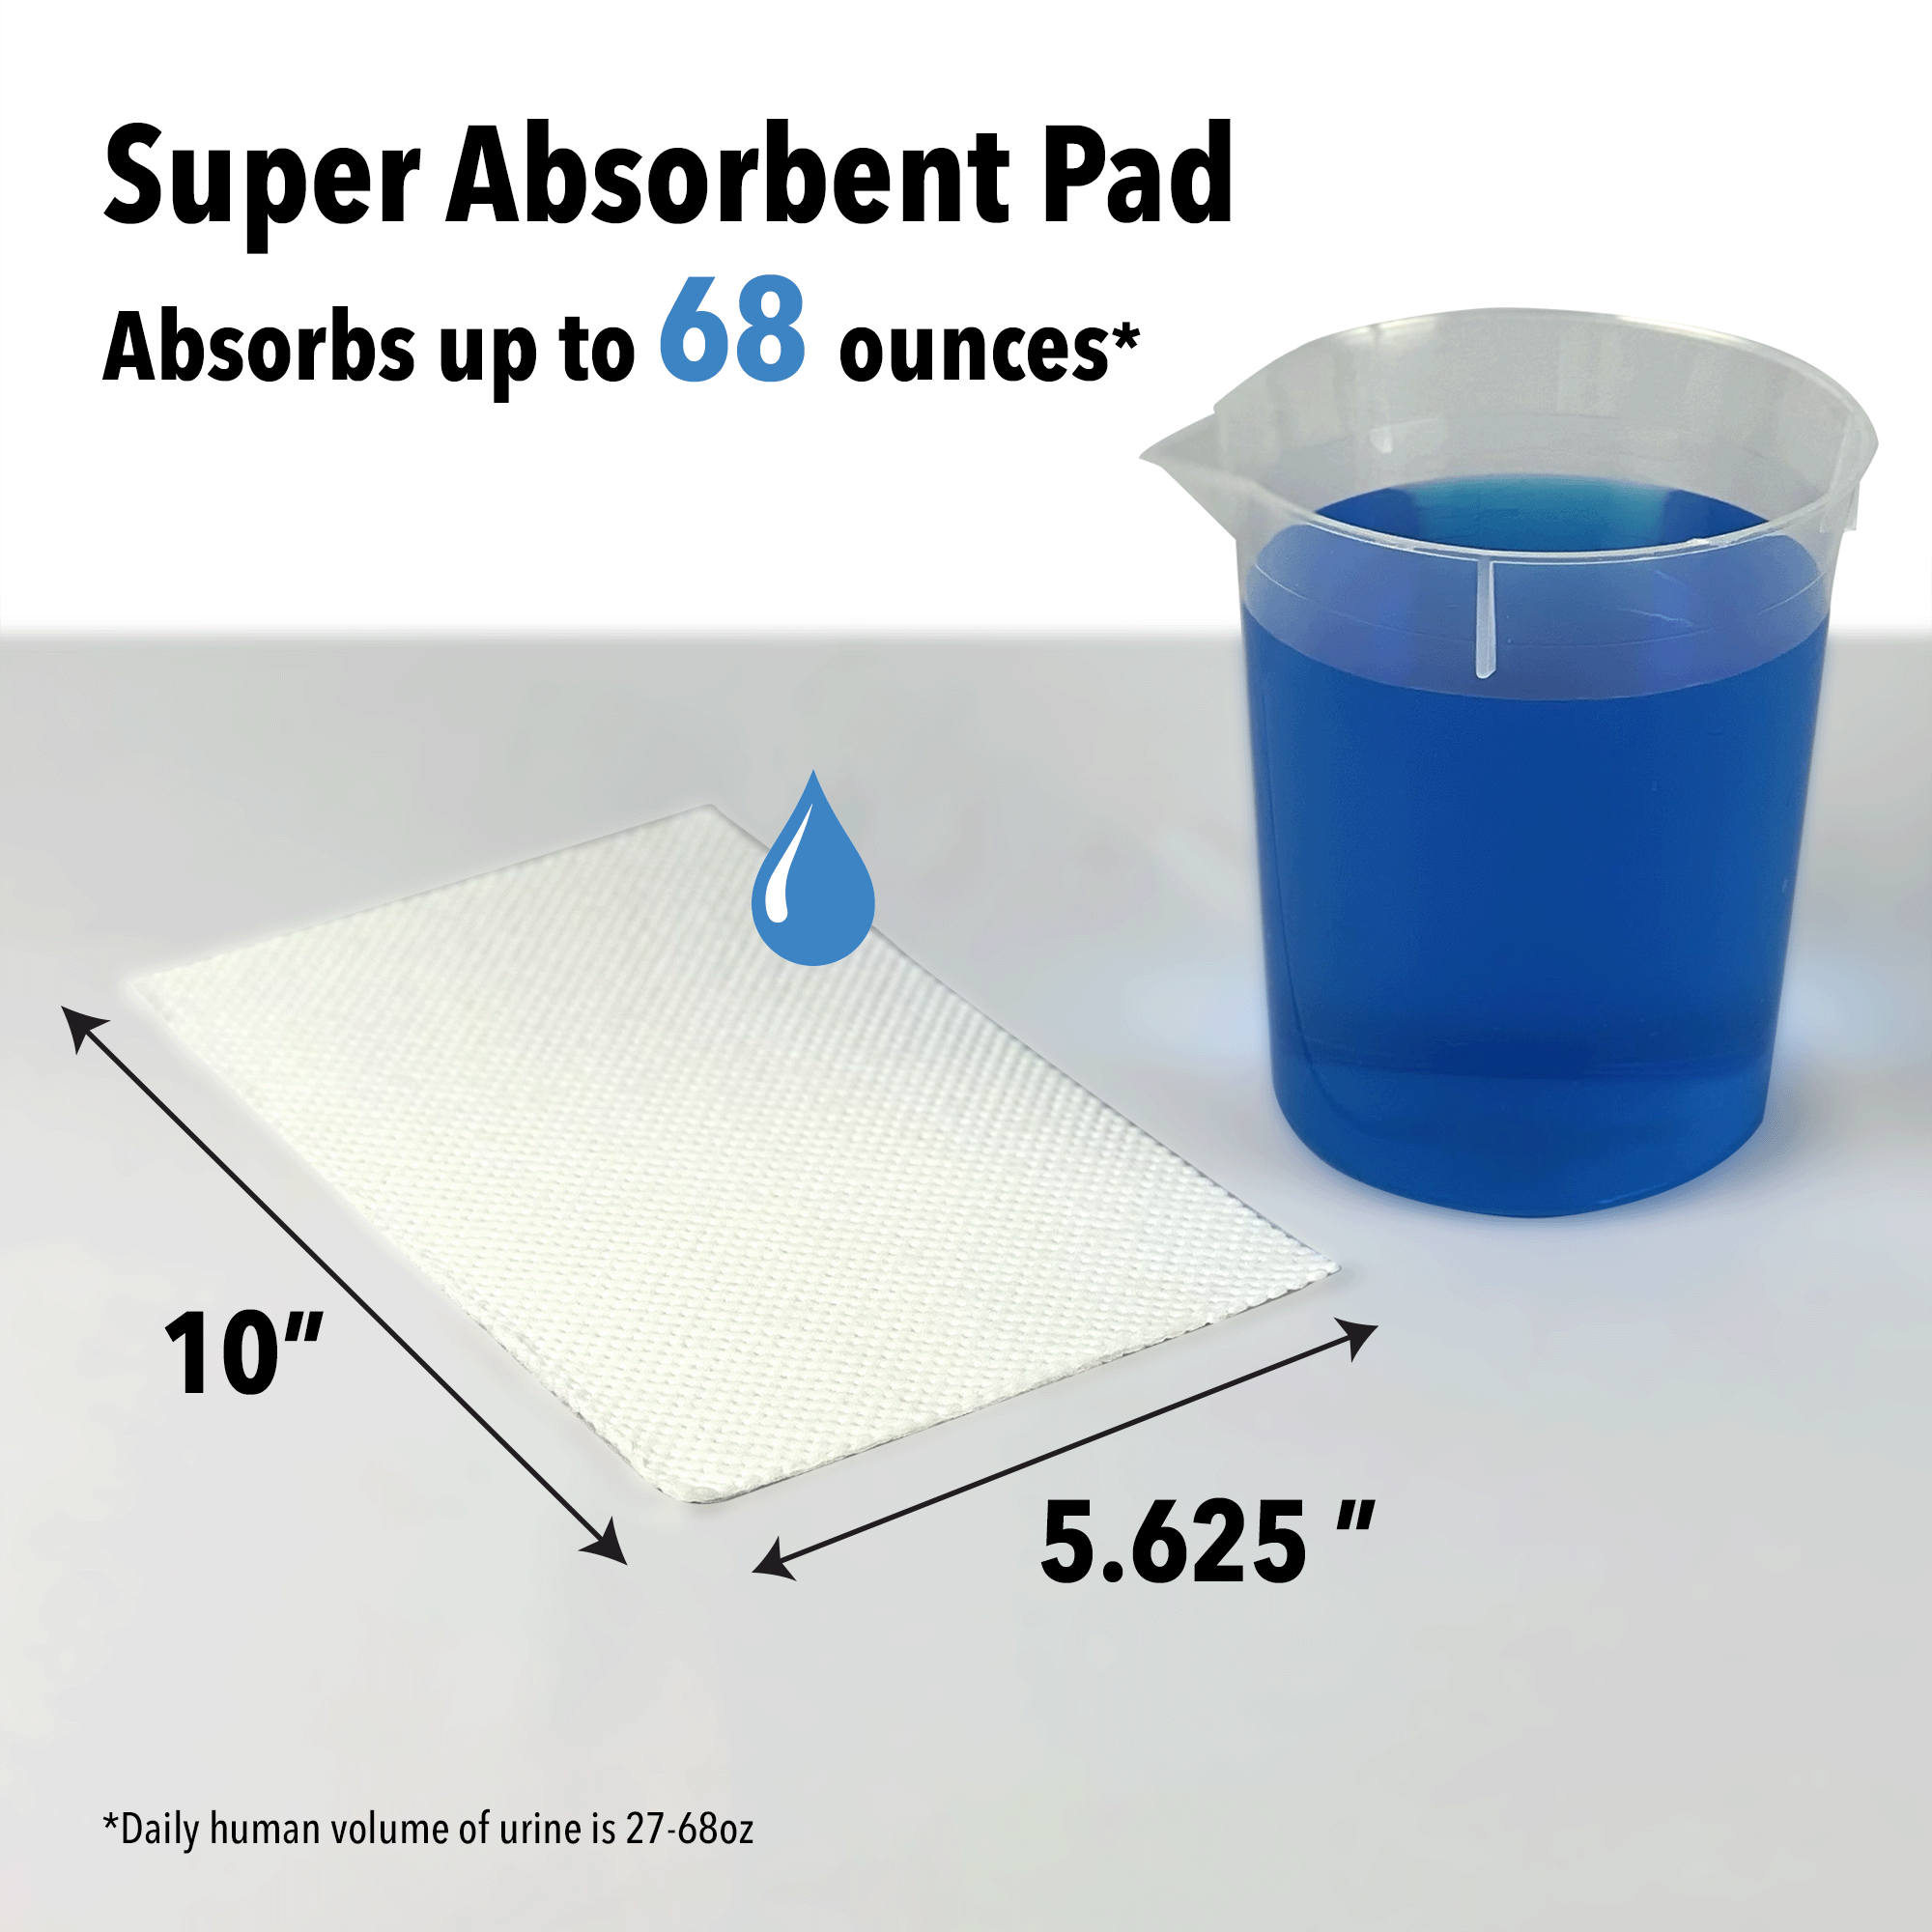 Super Absorbent Liquid Lock Commode Pads for Bedside Commodes, Bedpans and  Potty Training - Absorbent Specialty Products